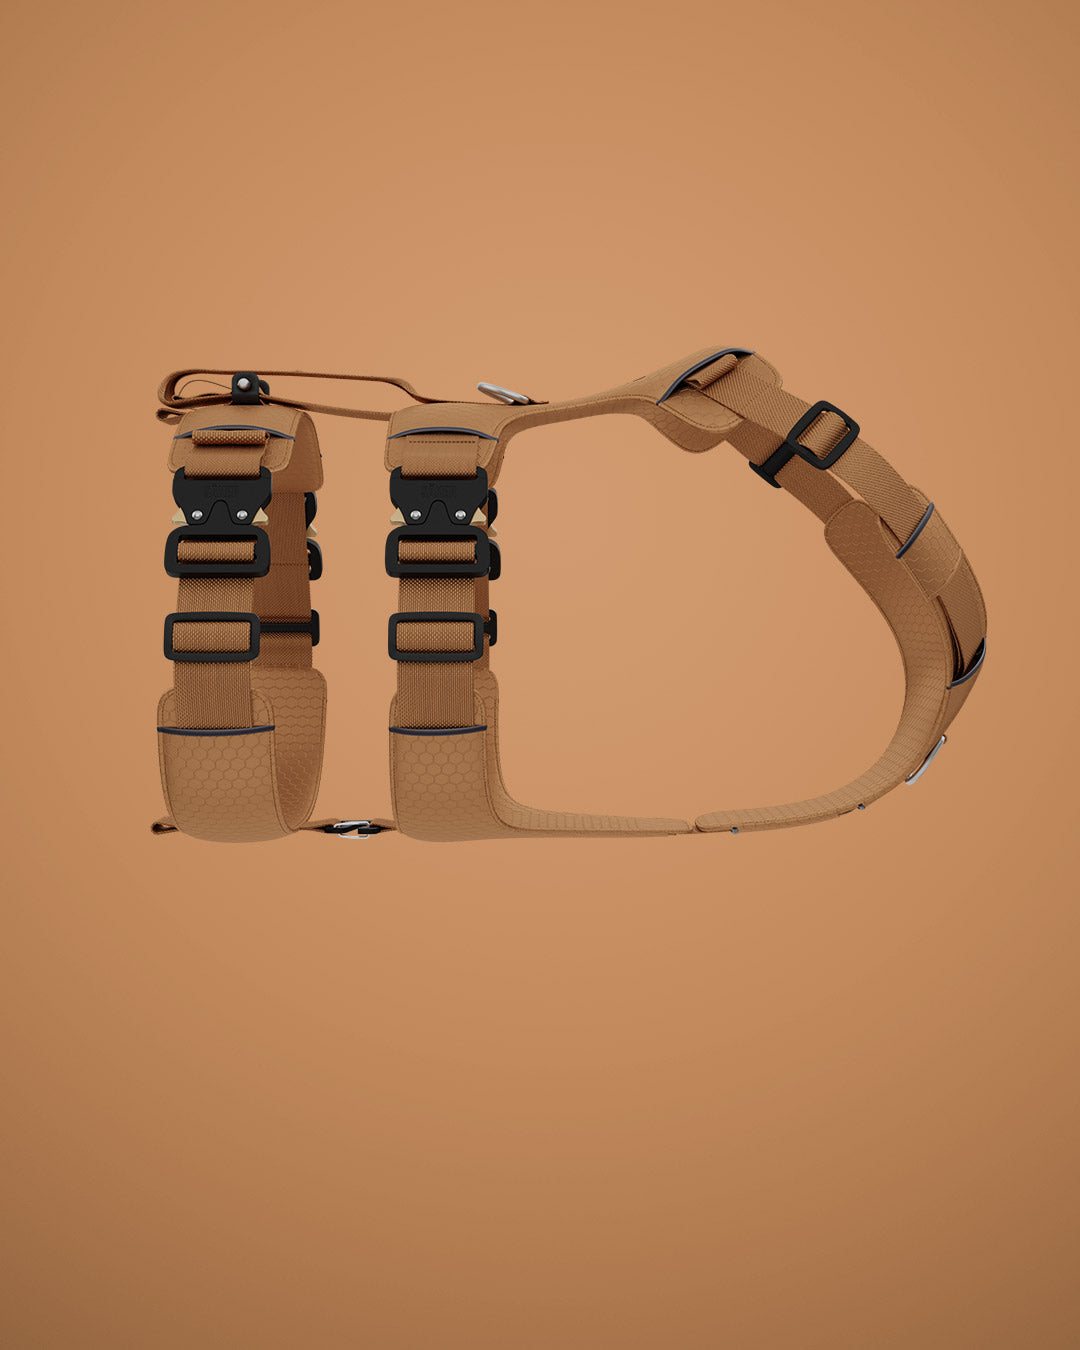 Side view of the canyon pro extended in sandstorm tan on tan background